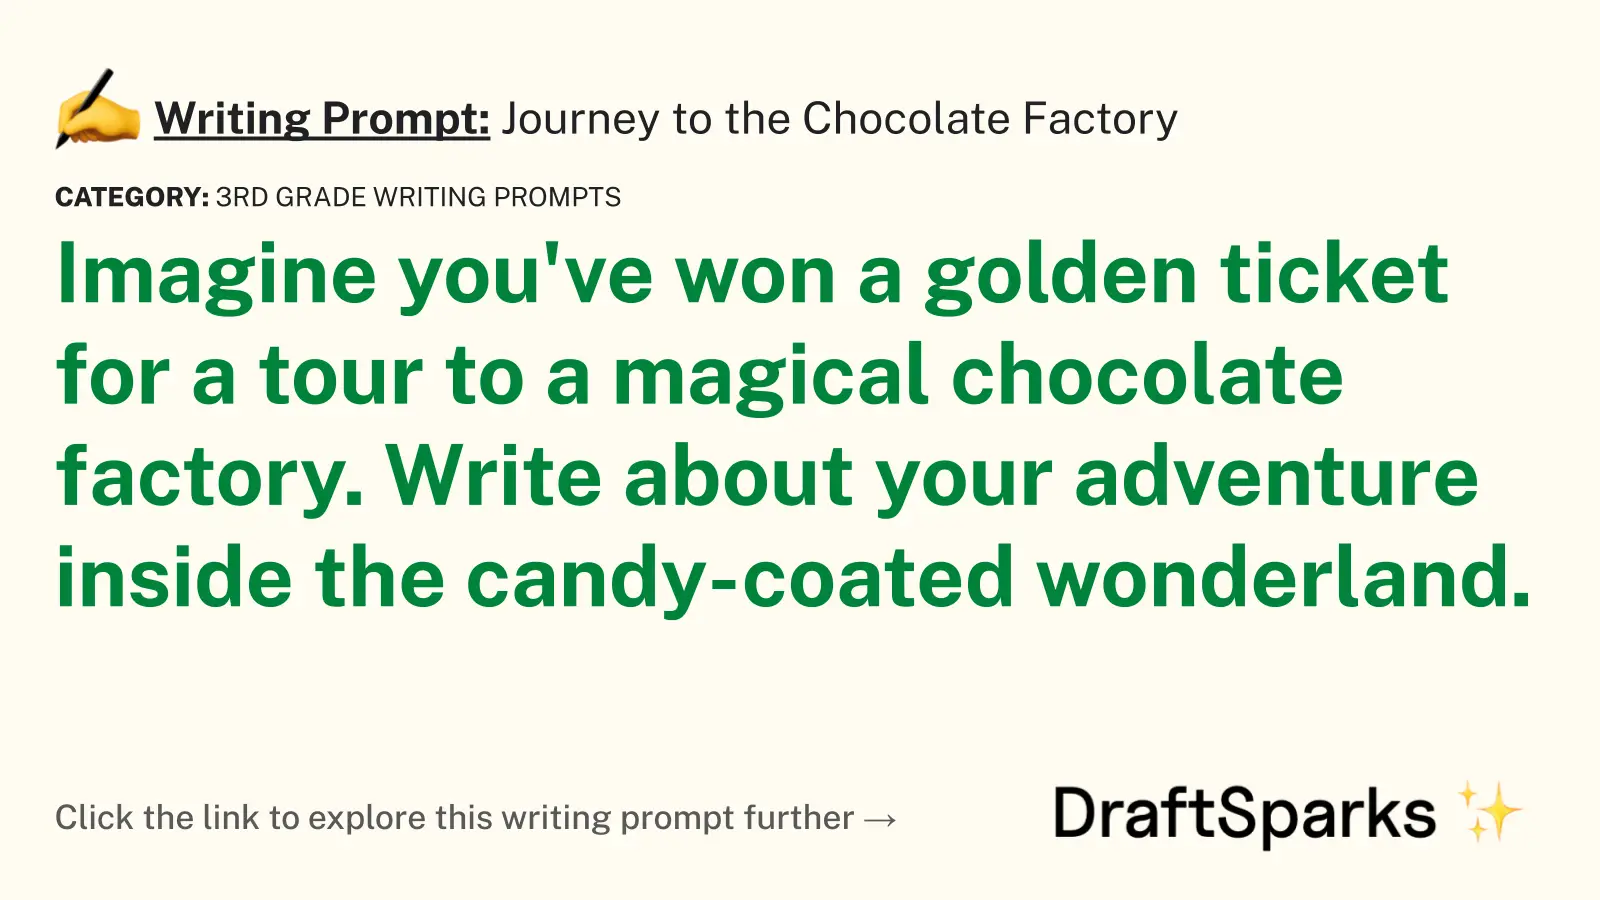 Journey to the Chocolate Factory